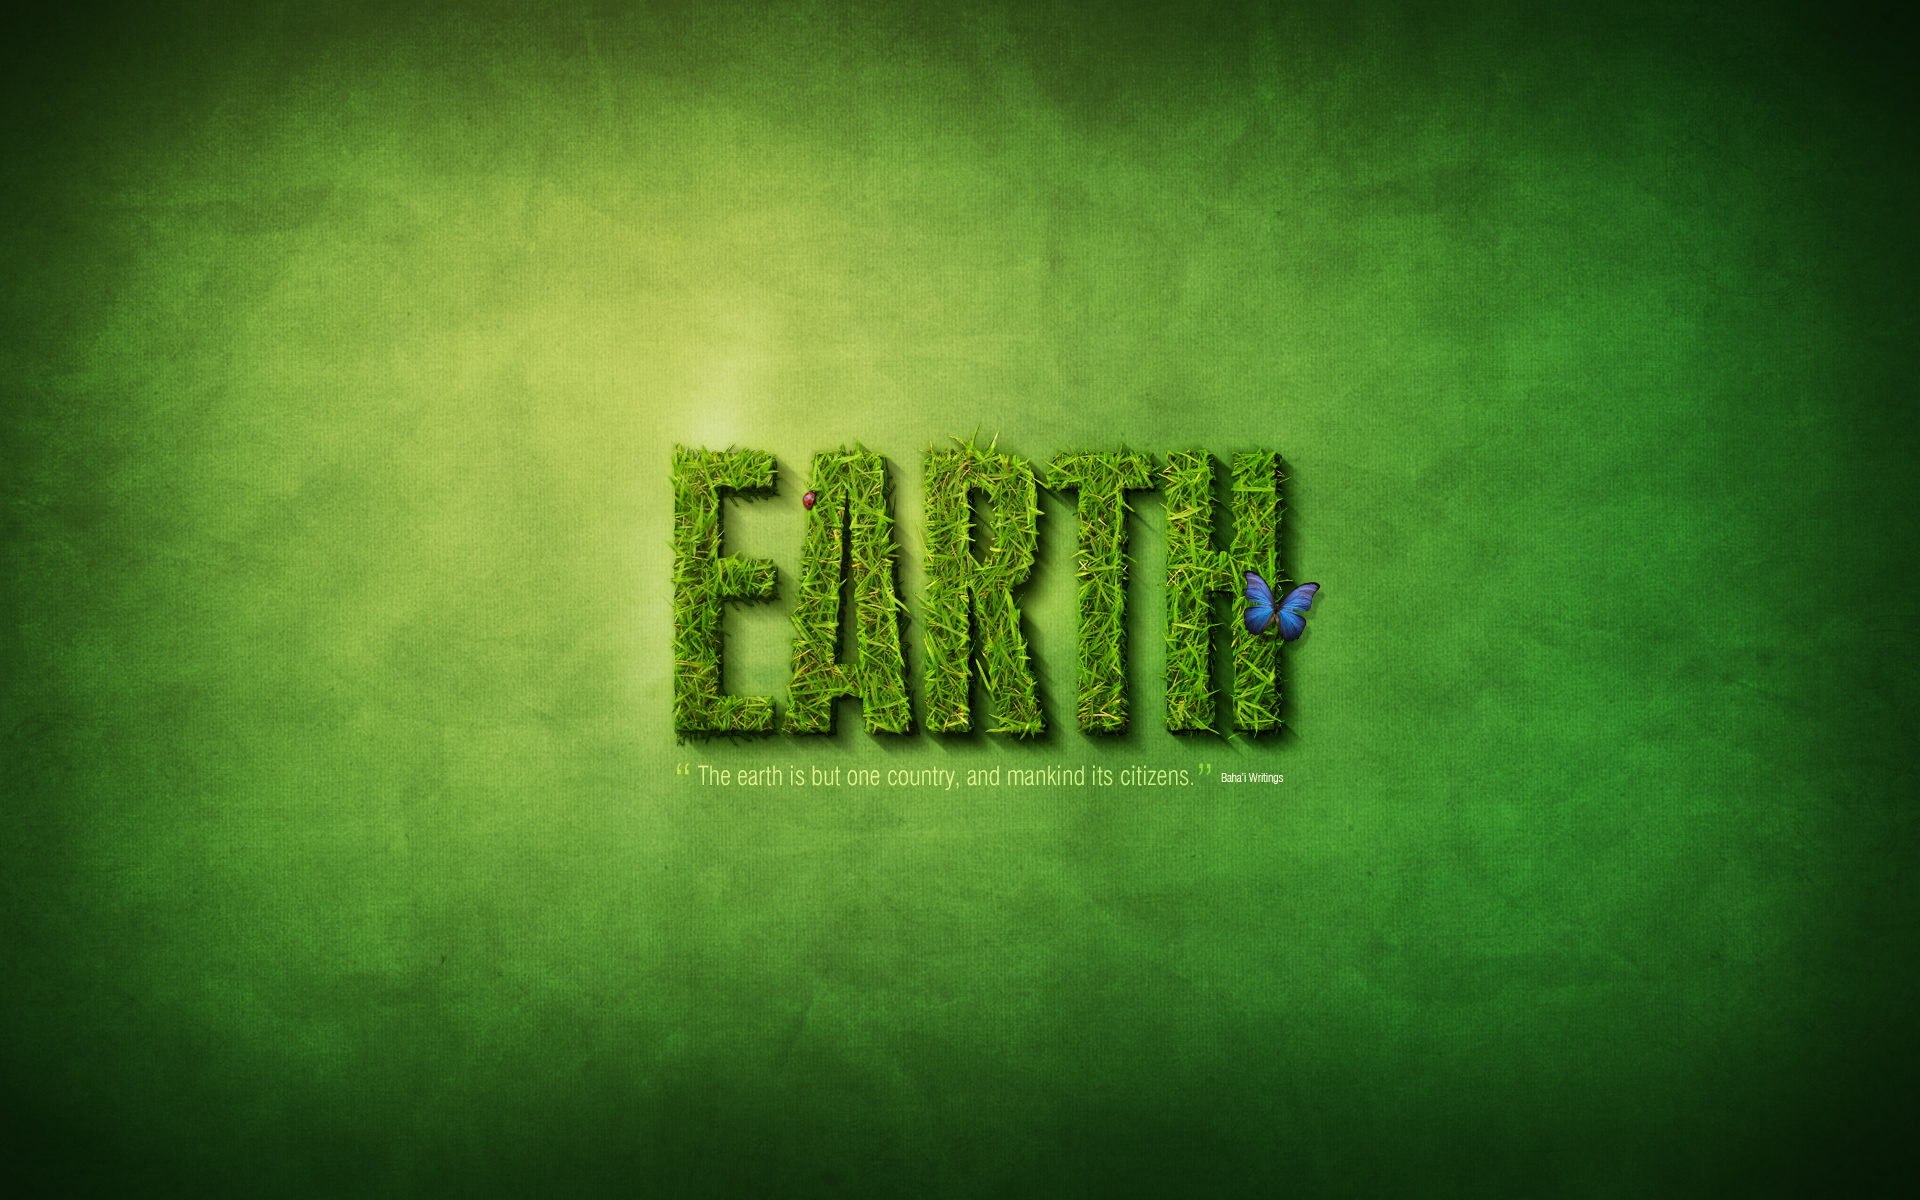 cool art photoshop background - Earth The histo r y and in its citizens